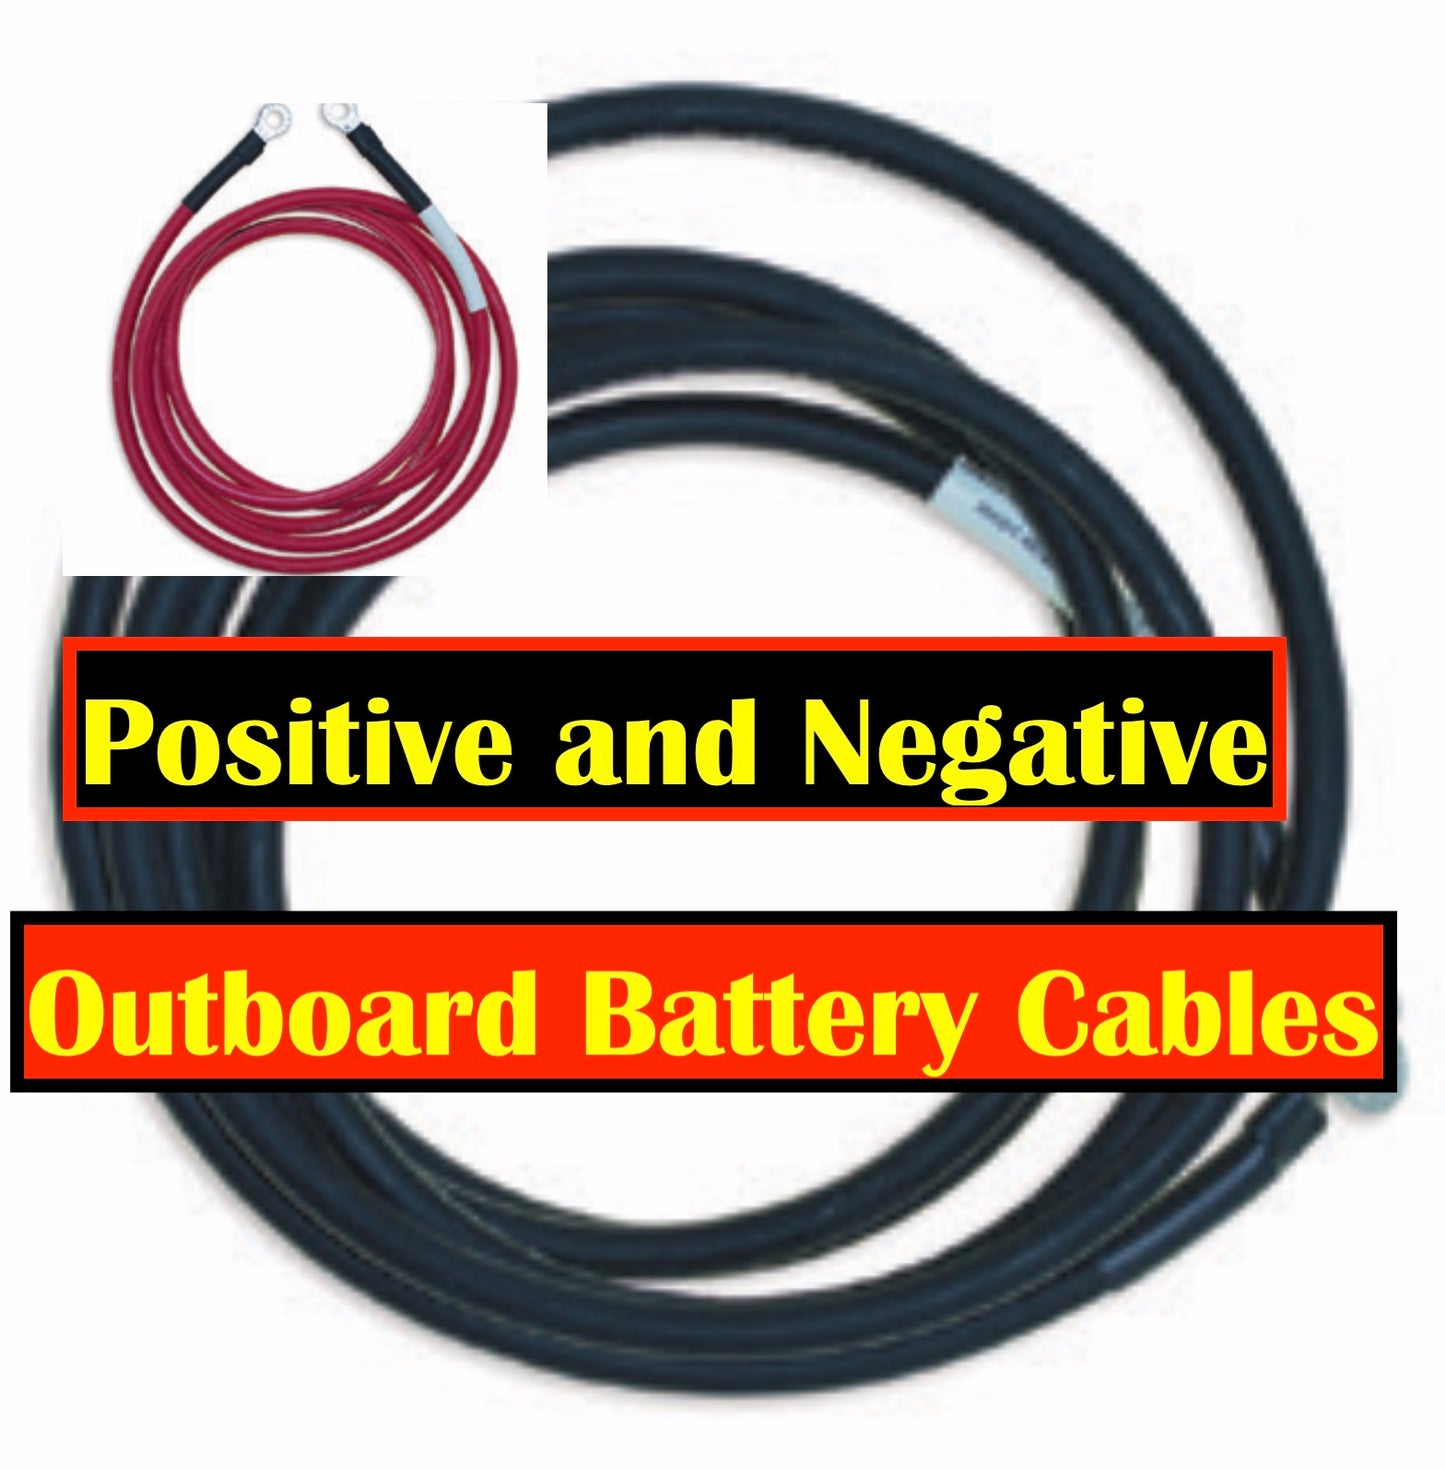 6 FT  # 6 GAUGE OUTBOARD BOAT BATTERY CABLES BLACK & RED YAMAHA MERCURY OMC USA